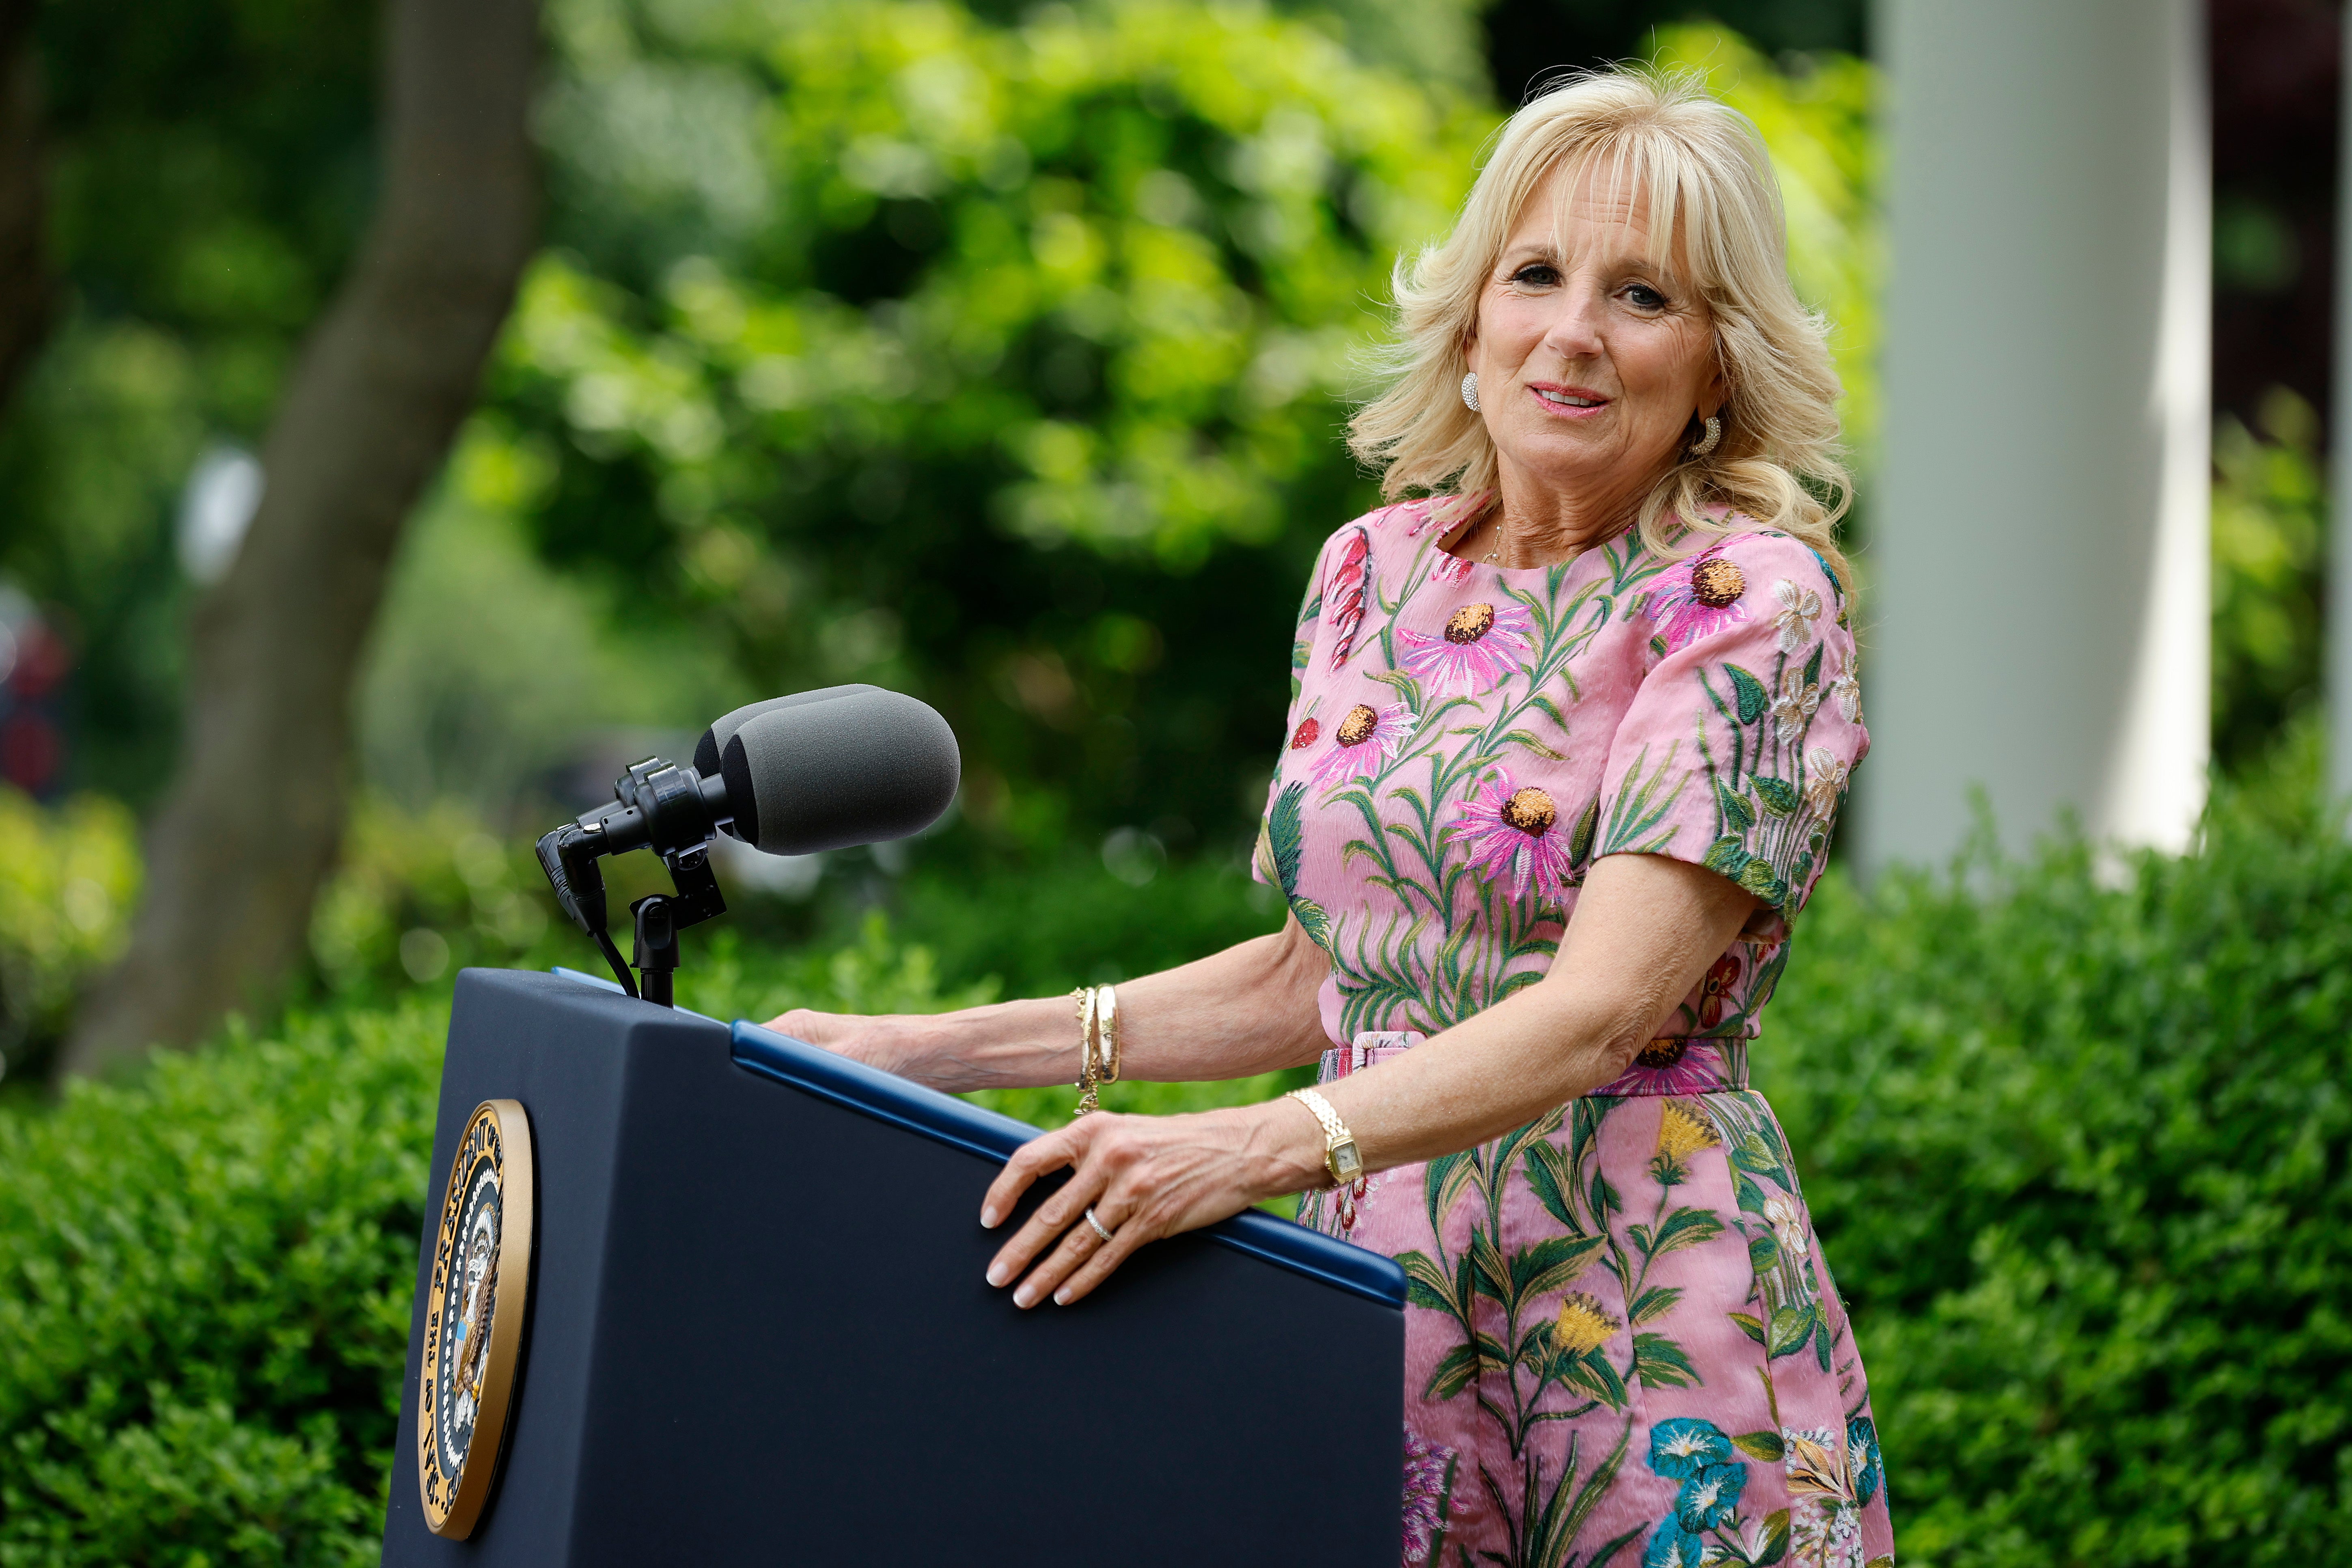 File photo: First lady Jill Biden in the Rose Garden of the White House on 17 May in Washington, DC